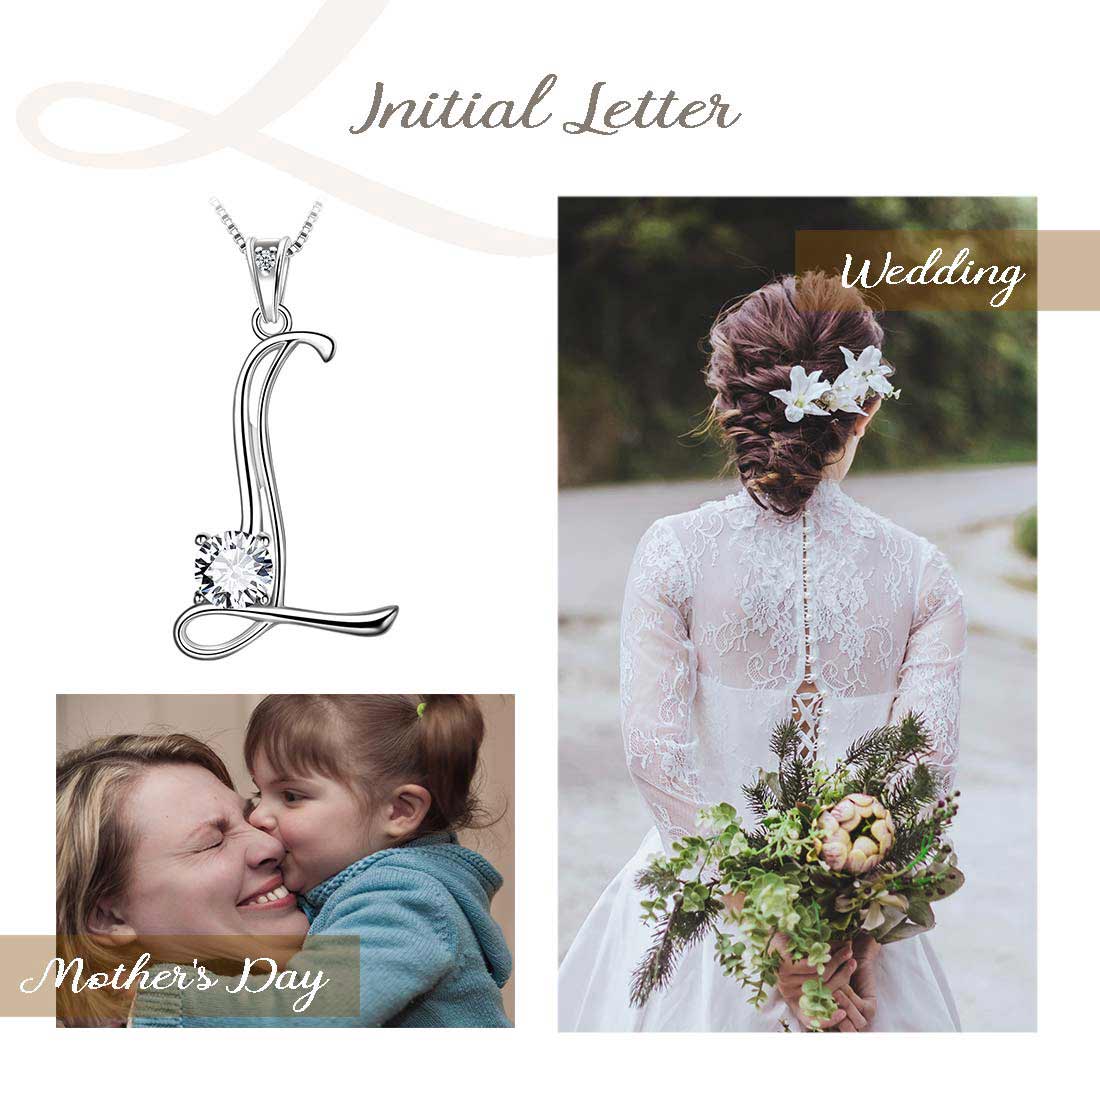 Women Letter L Initial Necklaces Sterling Silver - Necklaces - Aurora Tears Jewelry